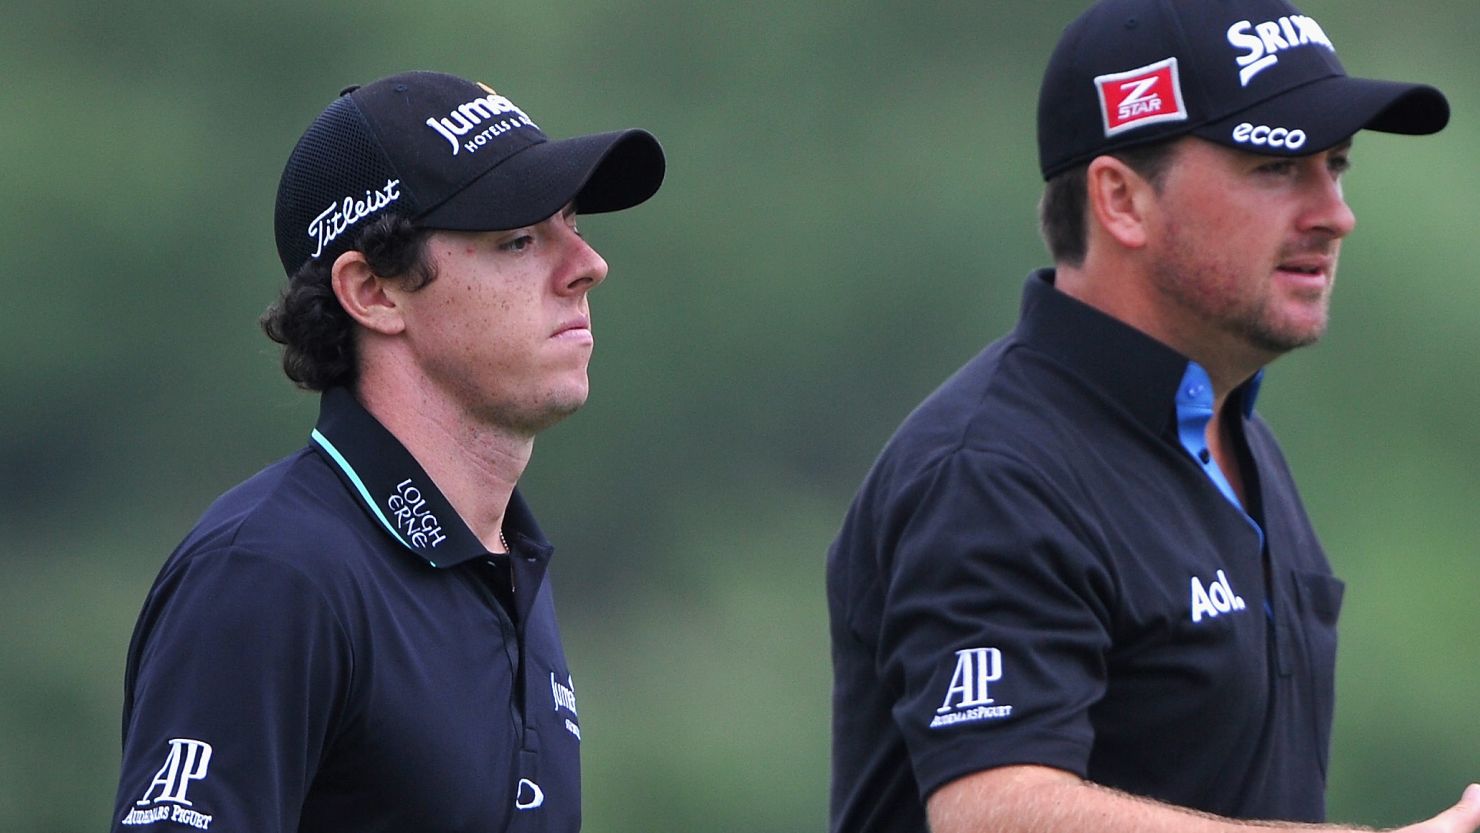 Rory McIlroy and Graeme McDowell march forward during their second round 68 in China